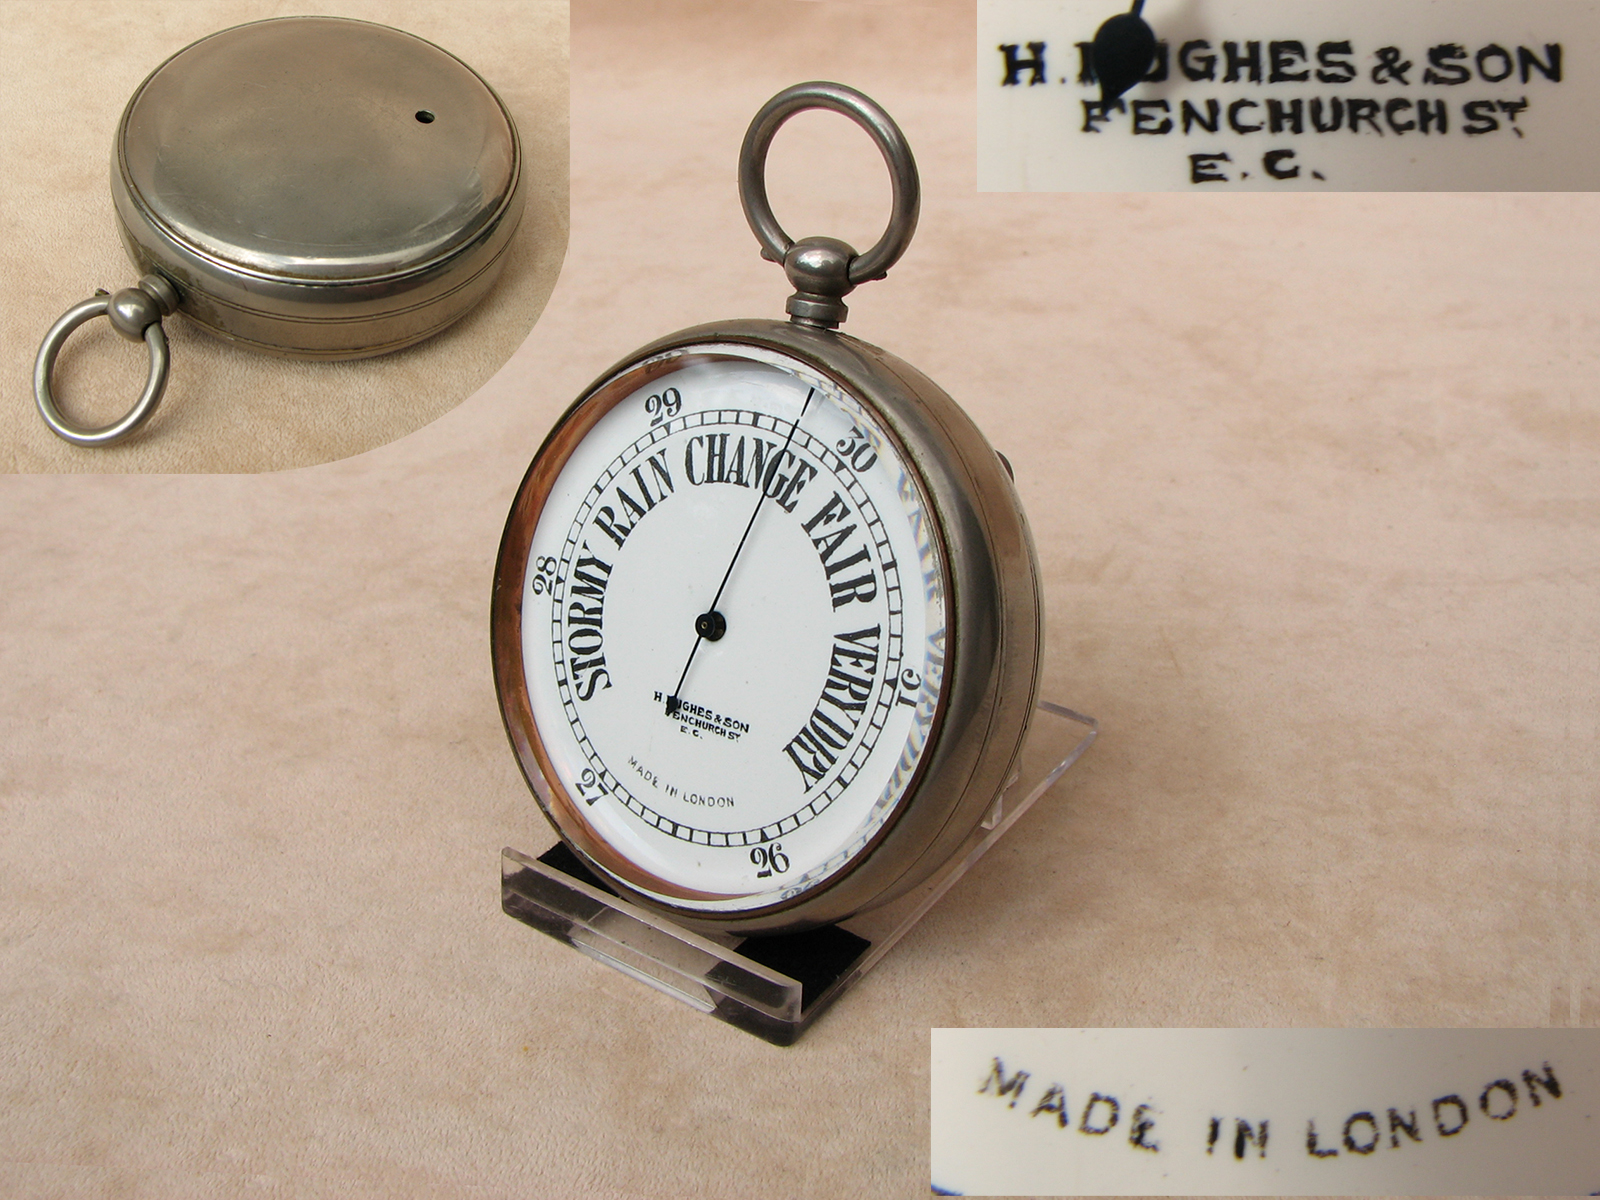 Early 20th century Henry Hughes & Son Goliath size pocket barometer